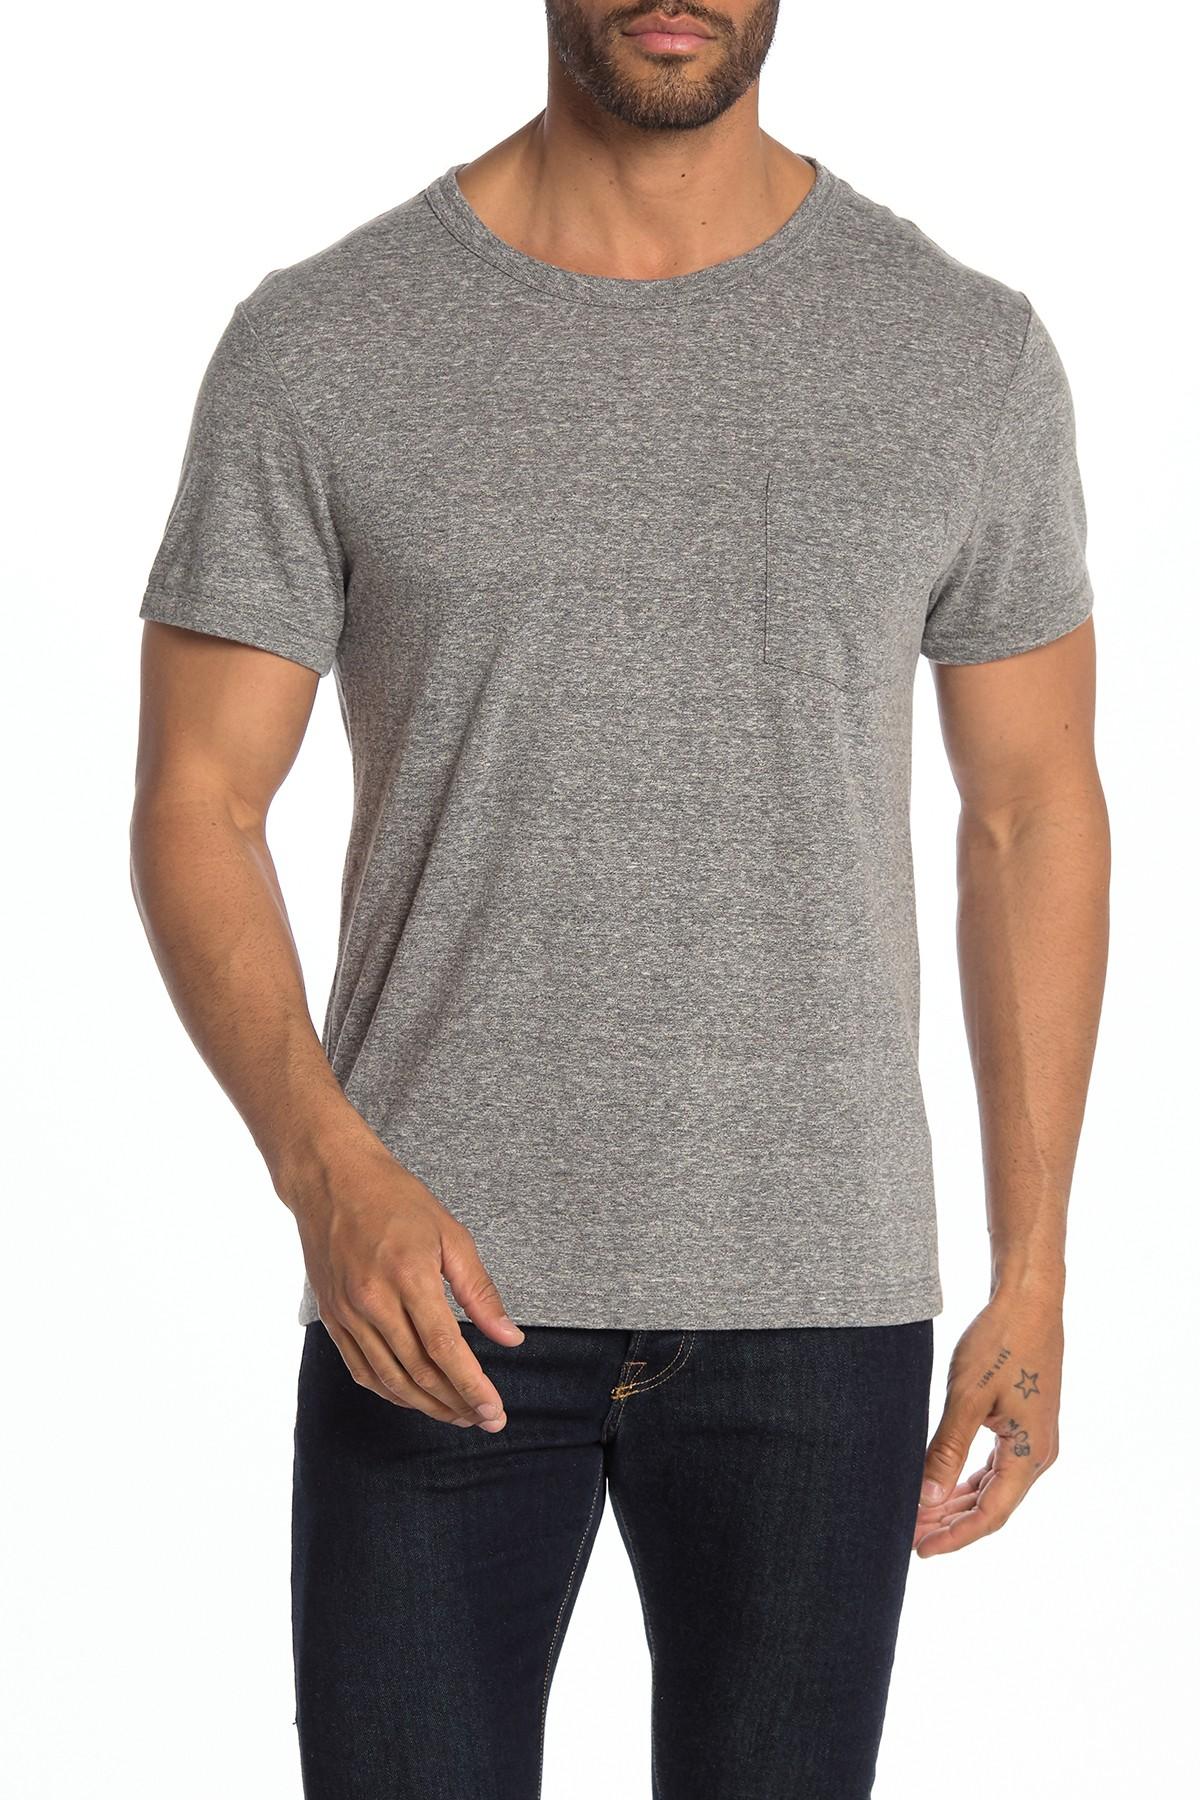 Madewell Synthetic Pocket T-shirt in Heather Grey (Gray) for Men - Lyst